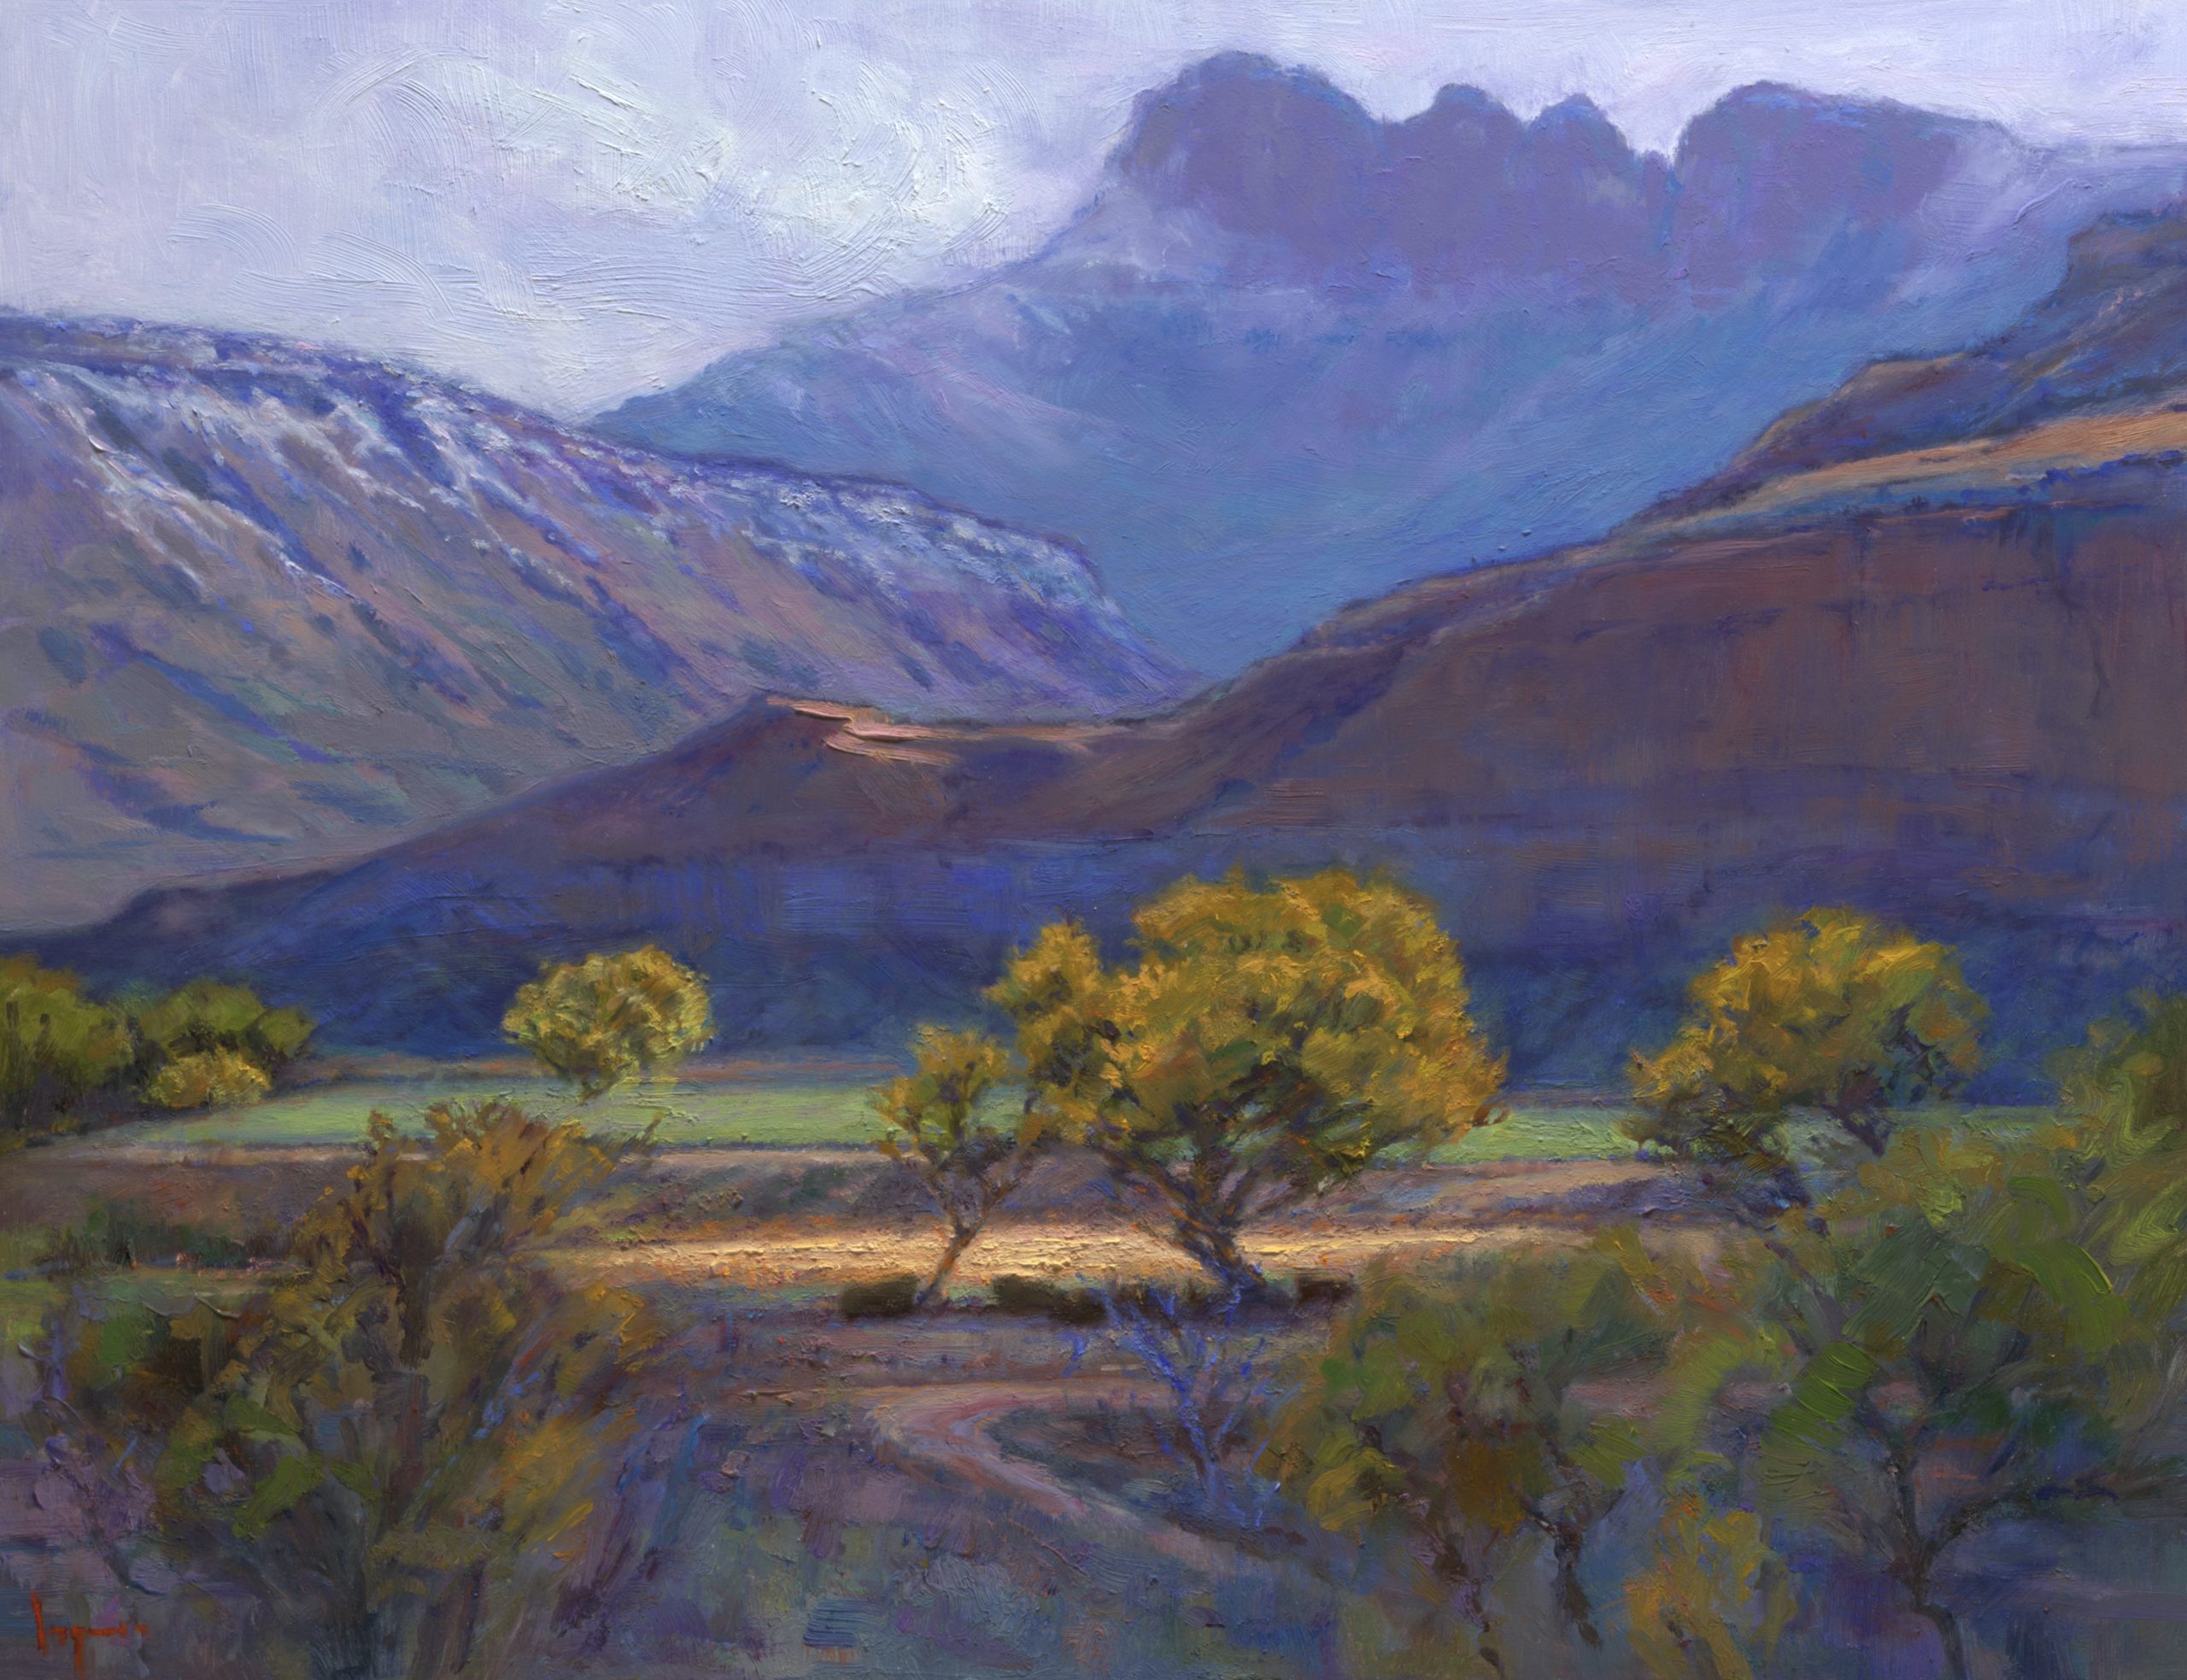 Mountain landscape painting - 6. Pamela Ingwers, "First Frost at the Ranch," Undated, oil, 16 x 20 in., Private collection, Studio from plein air